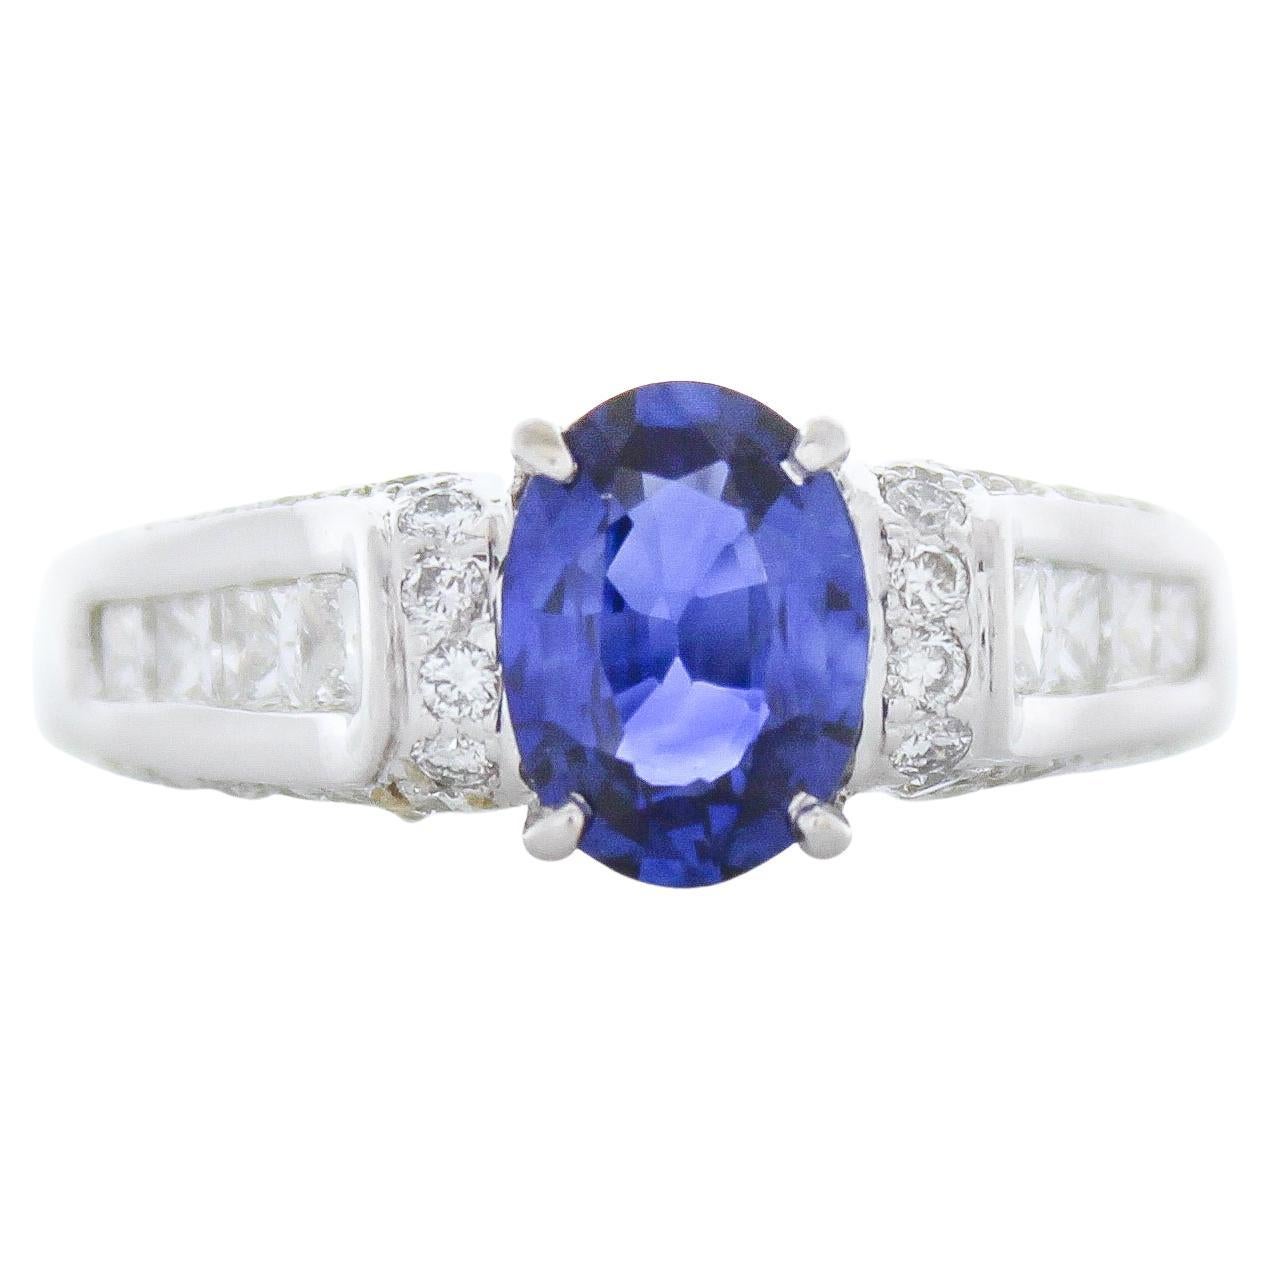 1.71CTW Certified Blue Sapphire Diamond Ring in 18K White Gold For Sale